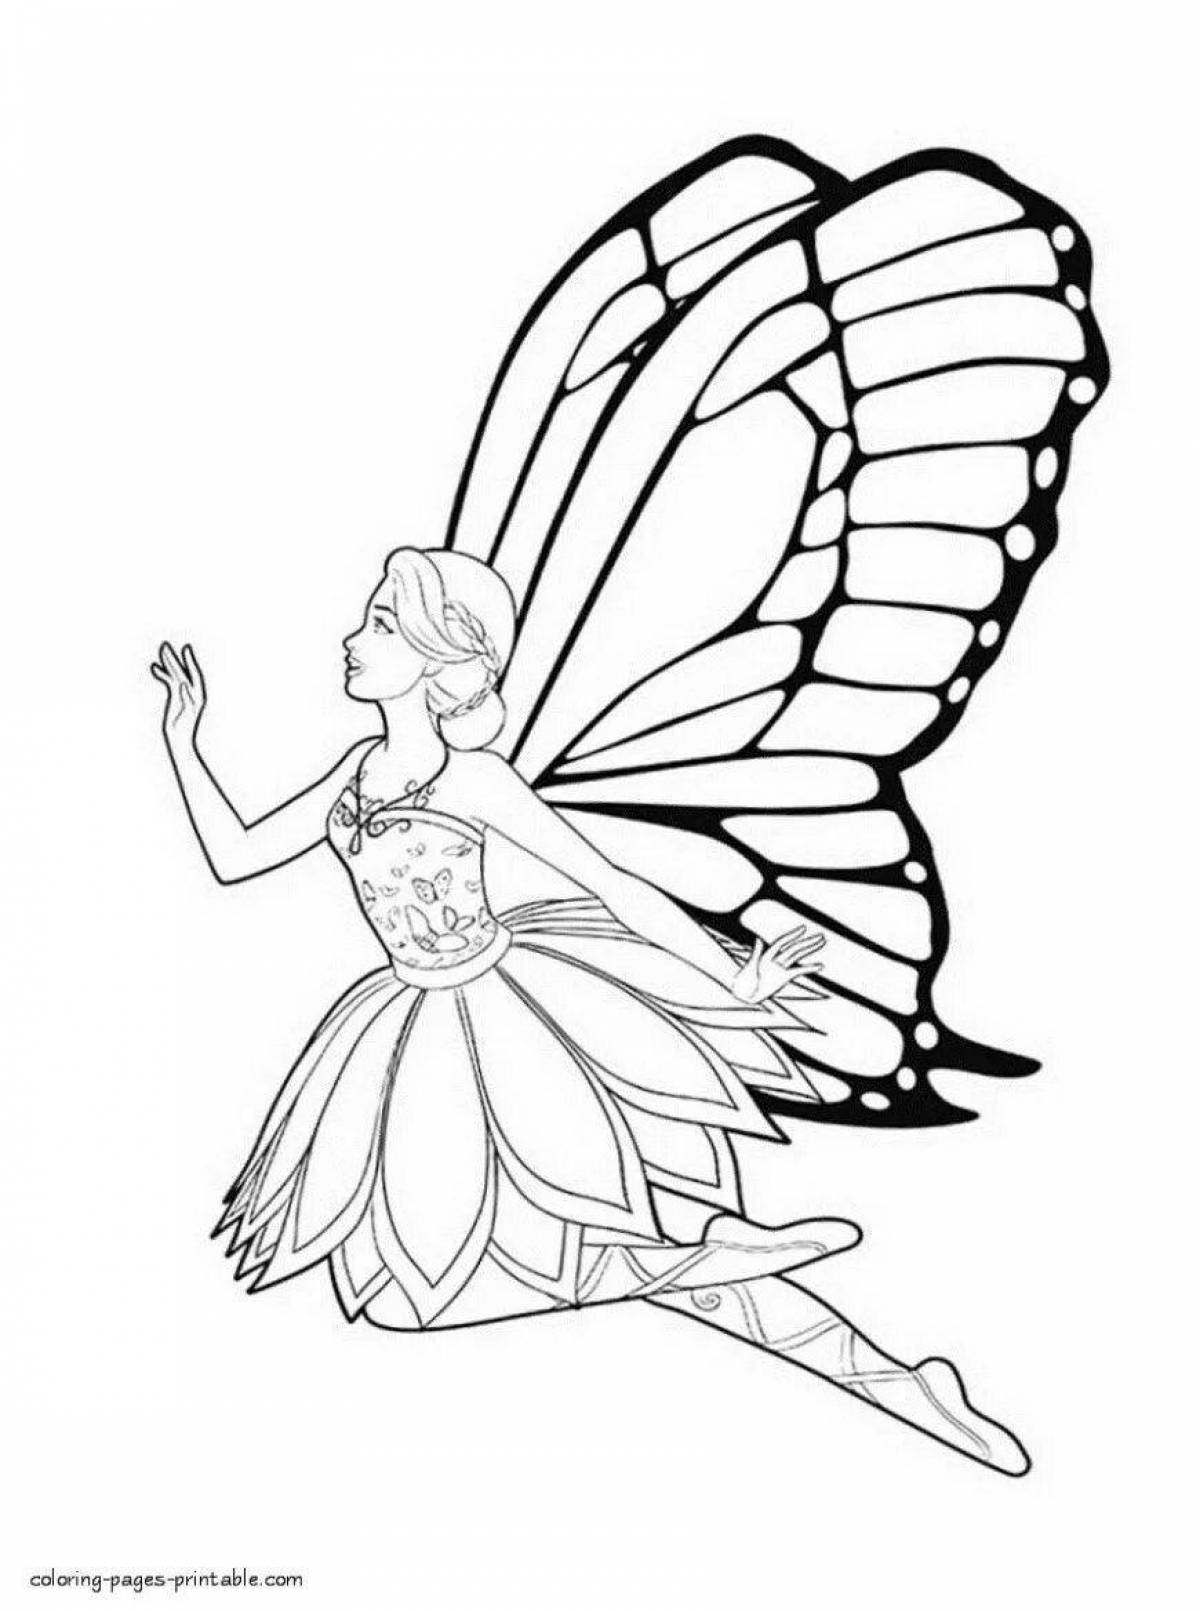 Joyful coloring fairy with wings